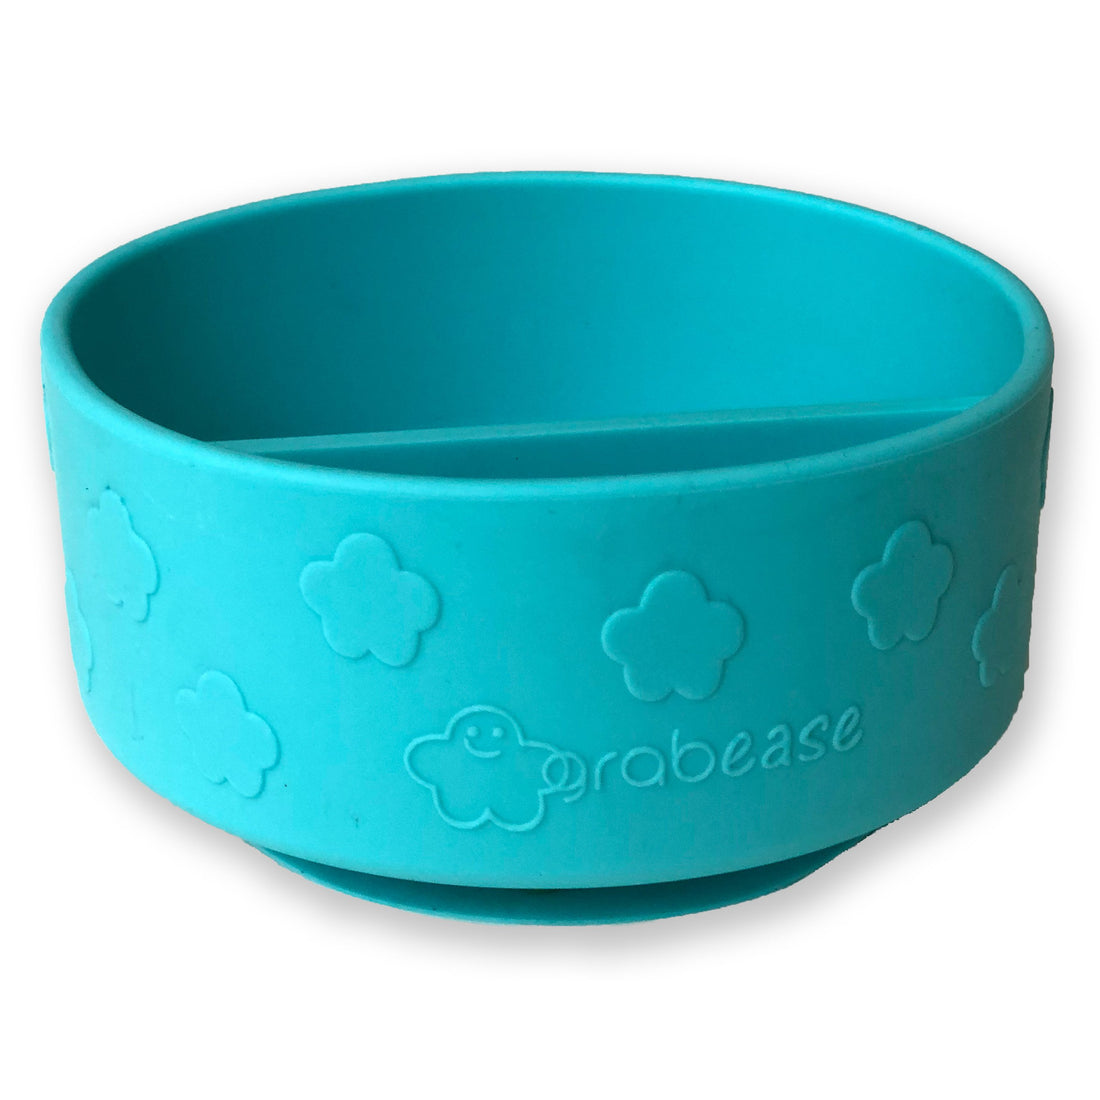 grabease-silicone-suction-bowl-teal- (1)